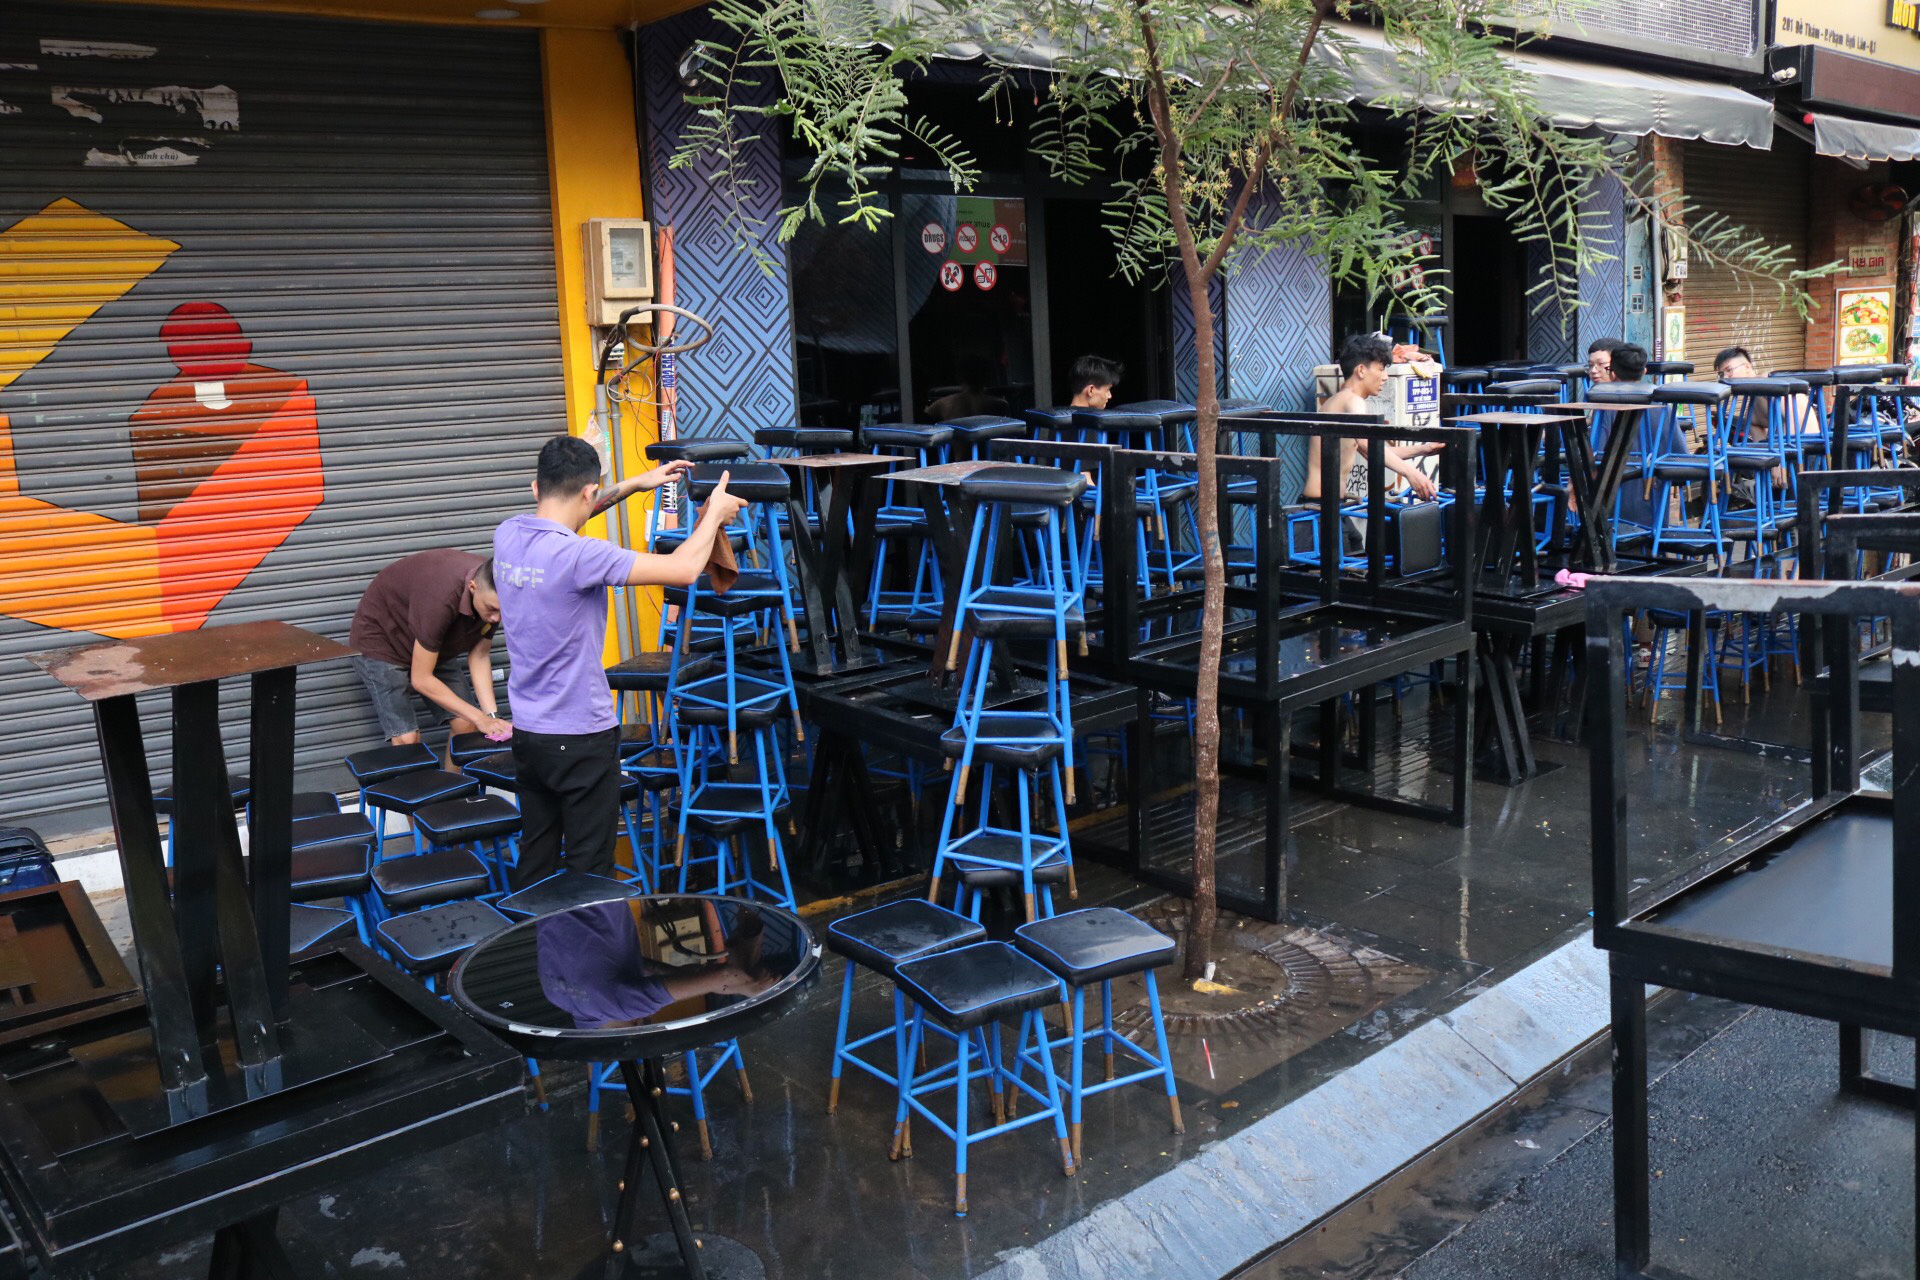 Employees of a business on Bui Vien ‘backpacker’s street’ in District 1, Ho Chi Minh City cleans tables and chairs to prepare for reopening following a closure due to coronavirus disease (COVID-19), May 8, 2020. Photo: Hoang An / Tuoi Tre